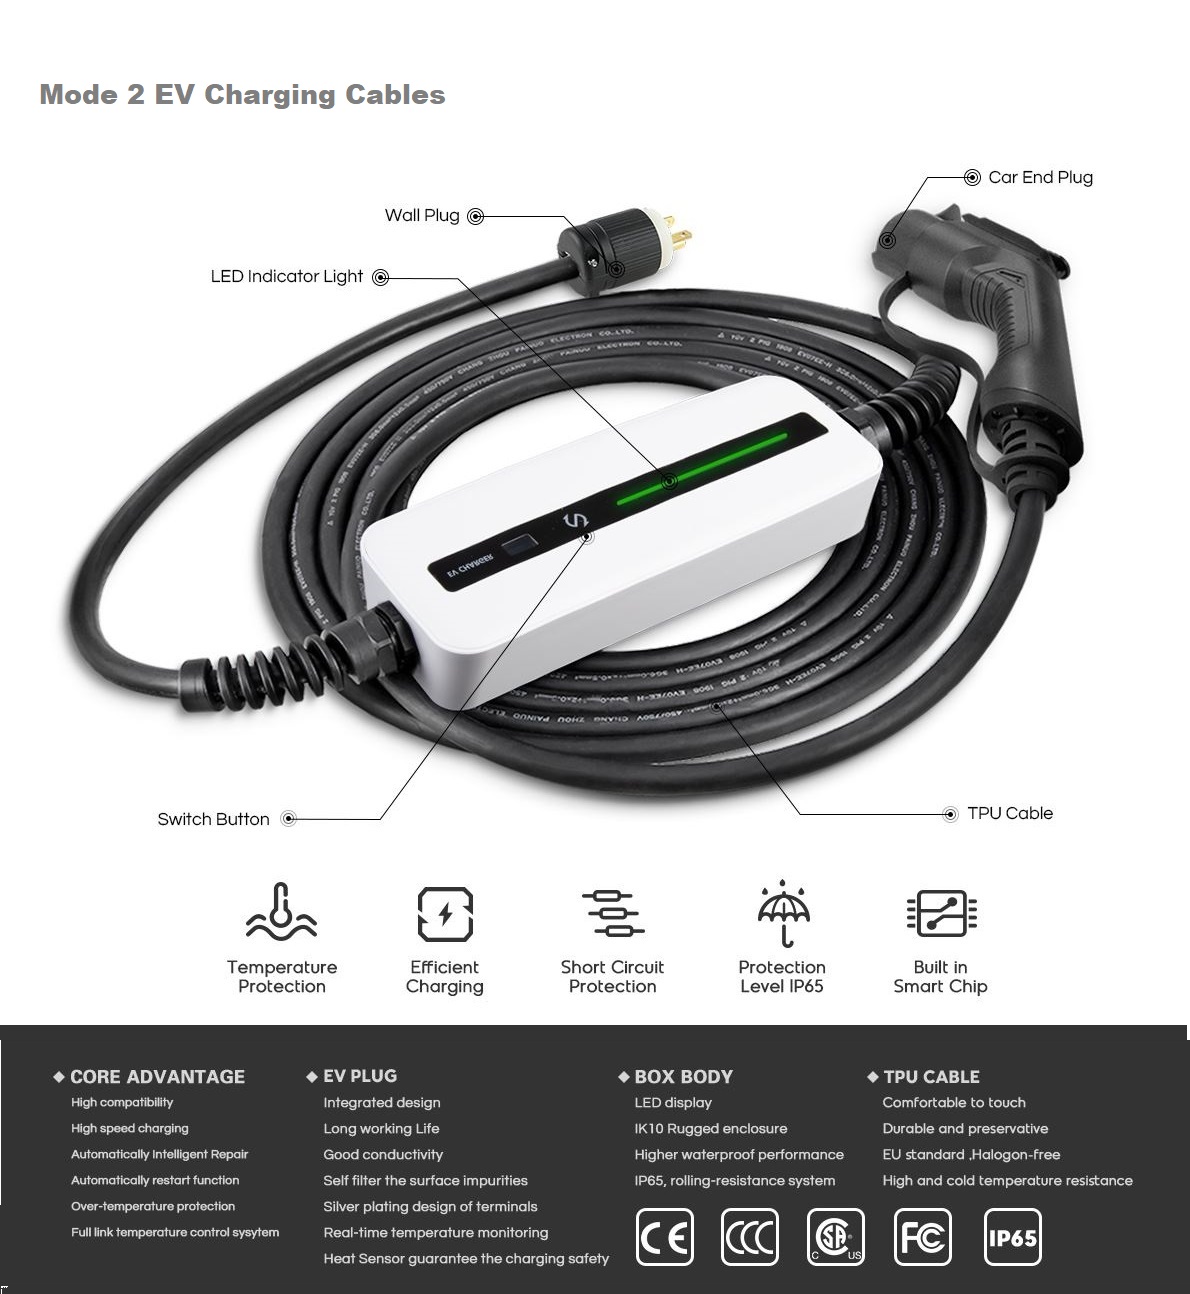 Mode 2 EV Charging Cable